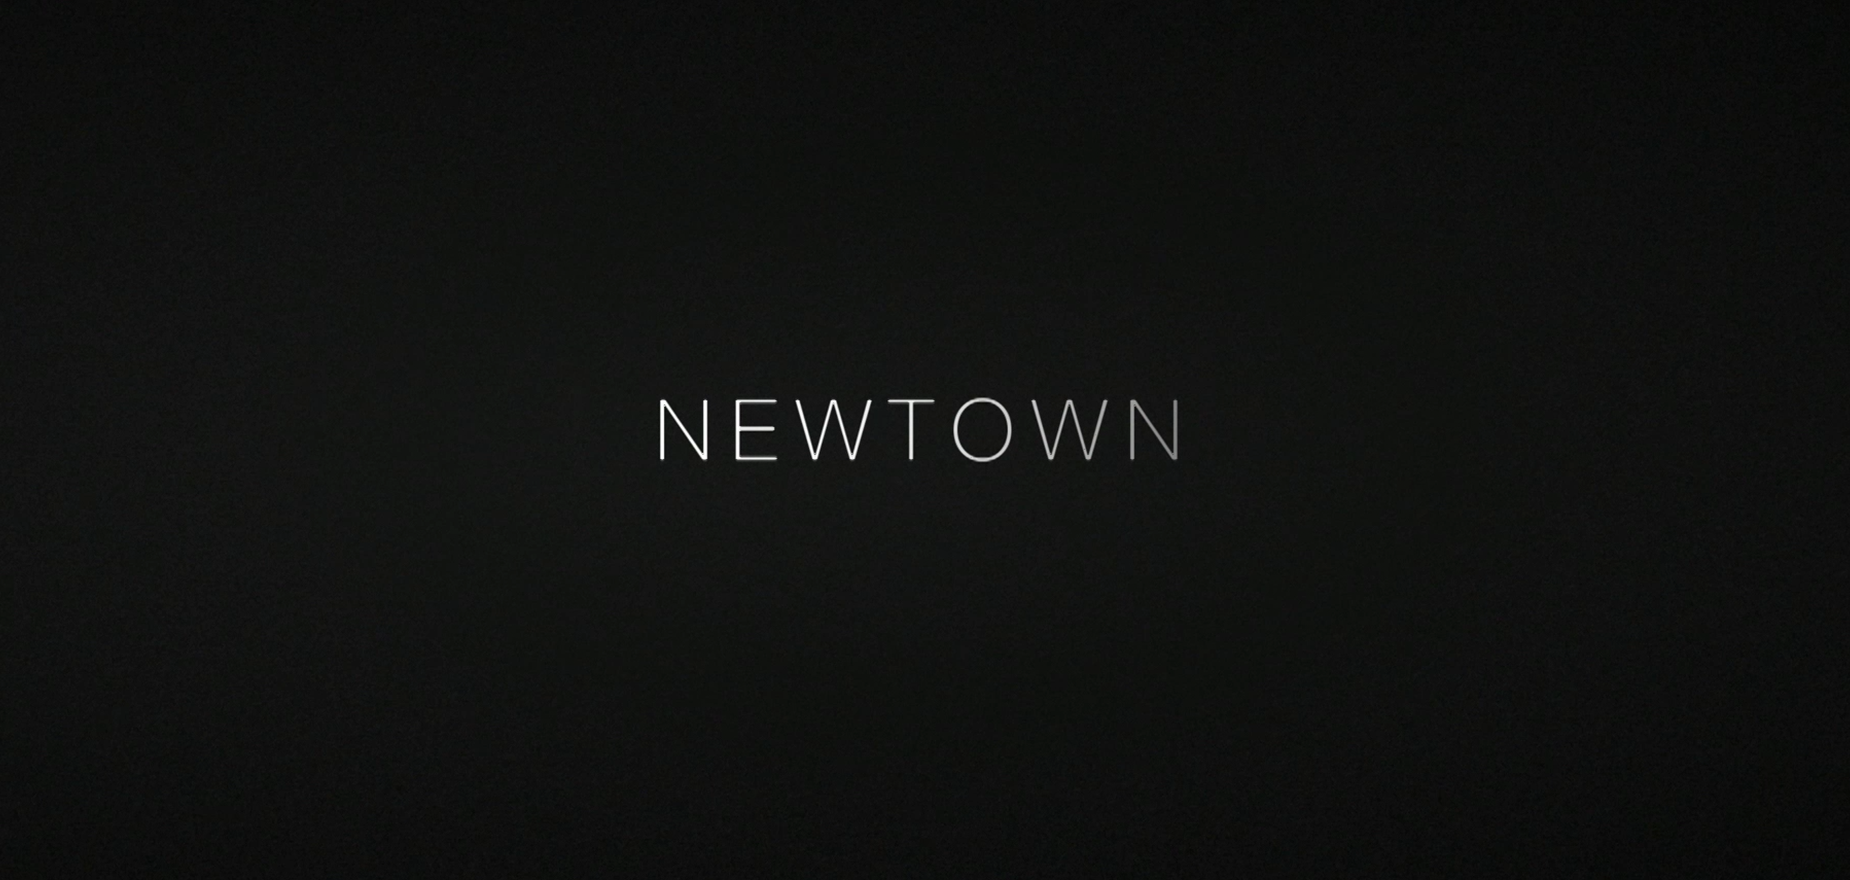 Independent Lens: Newtown - Mile 22 LLC, Independent Television Service (ITVS), in association with KA Snyder Productions, Cuomo Cole Productions